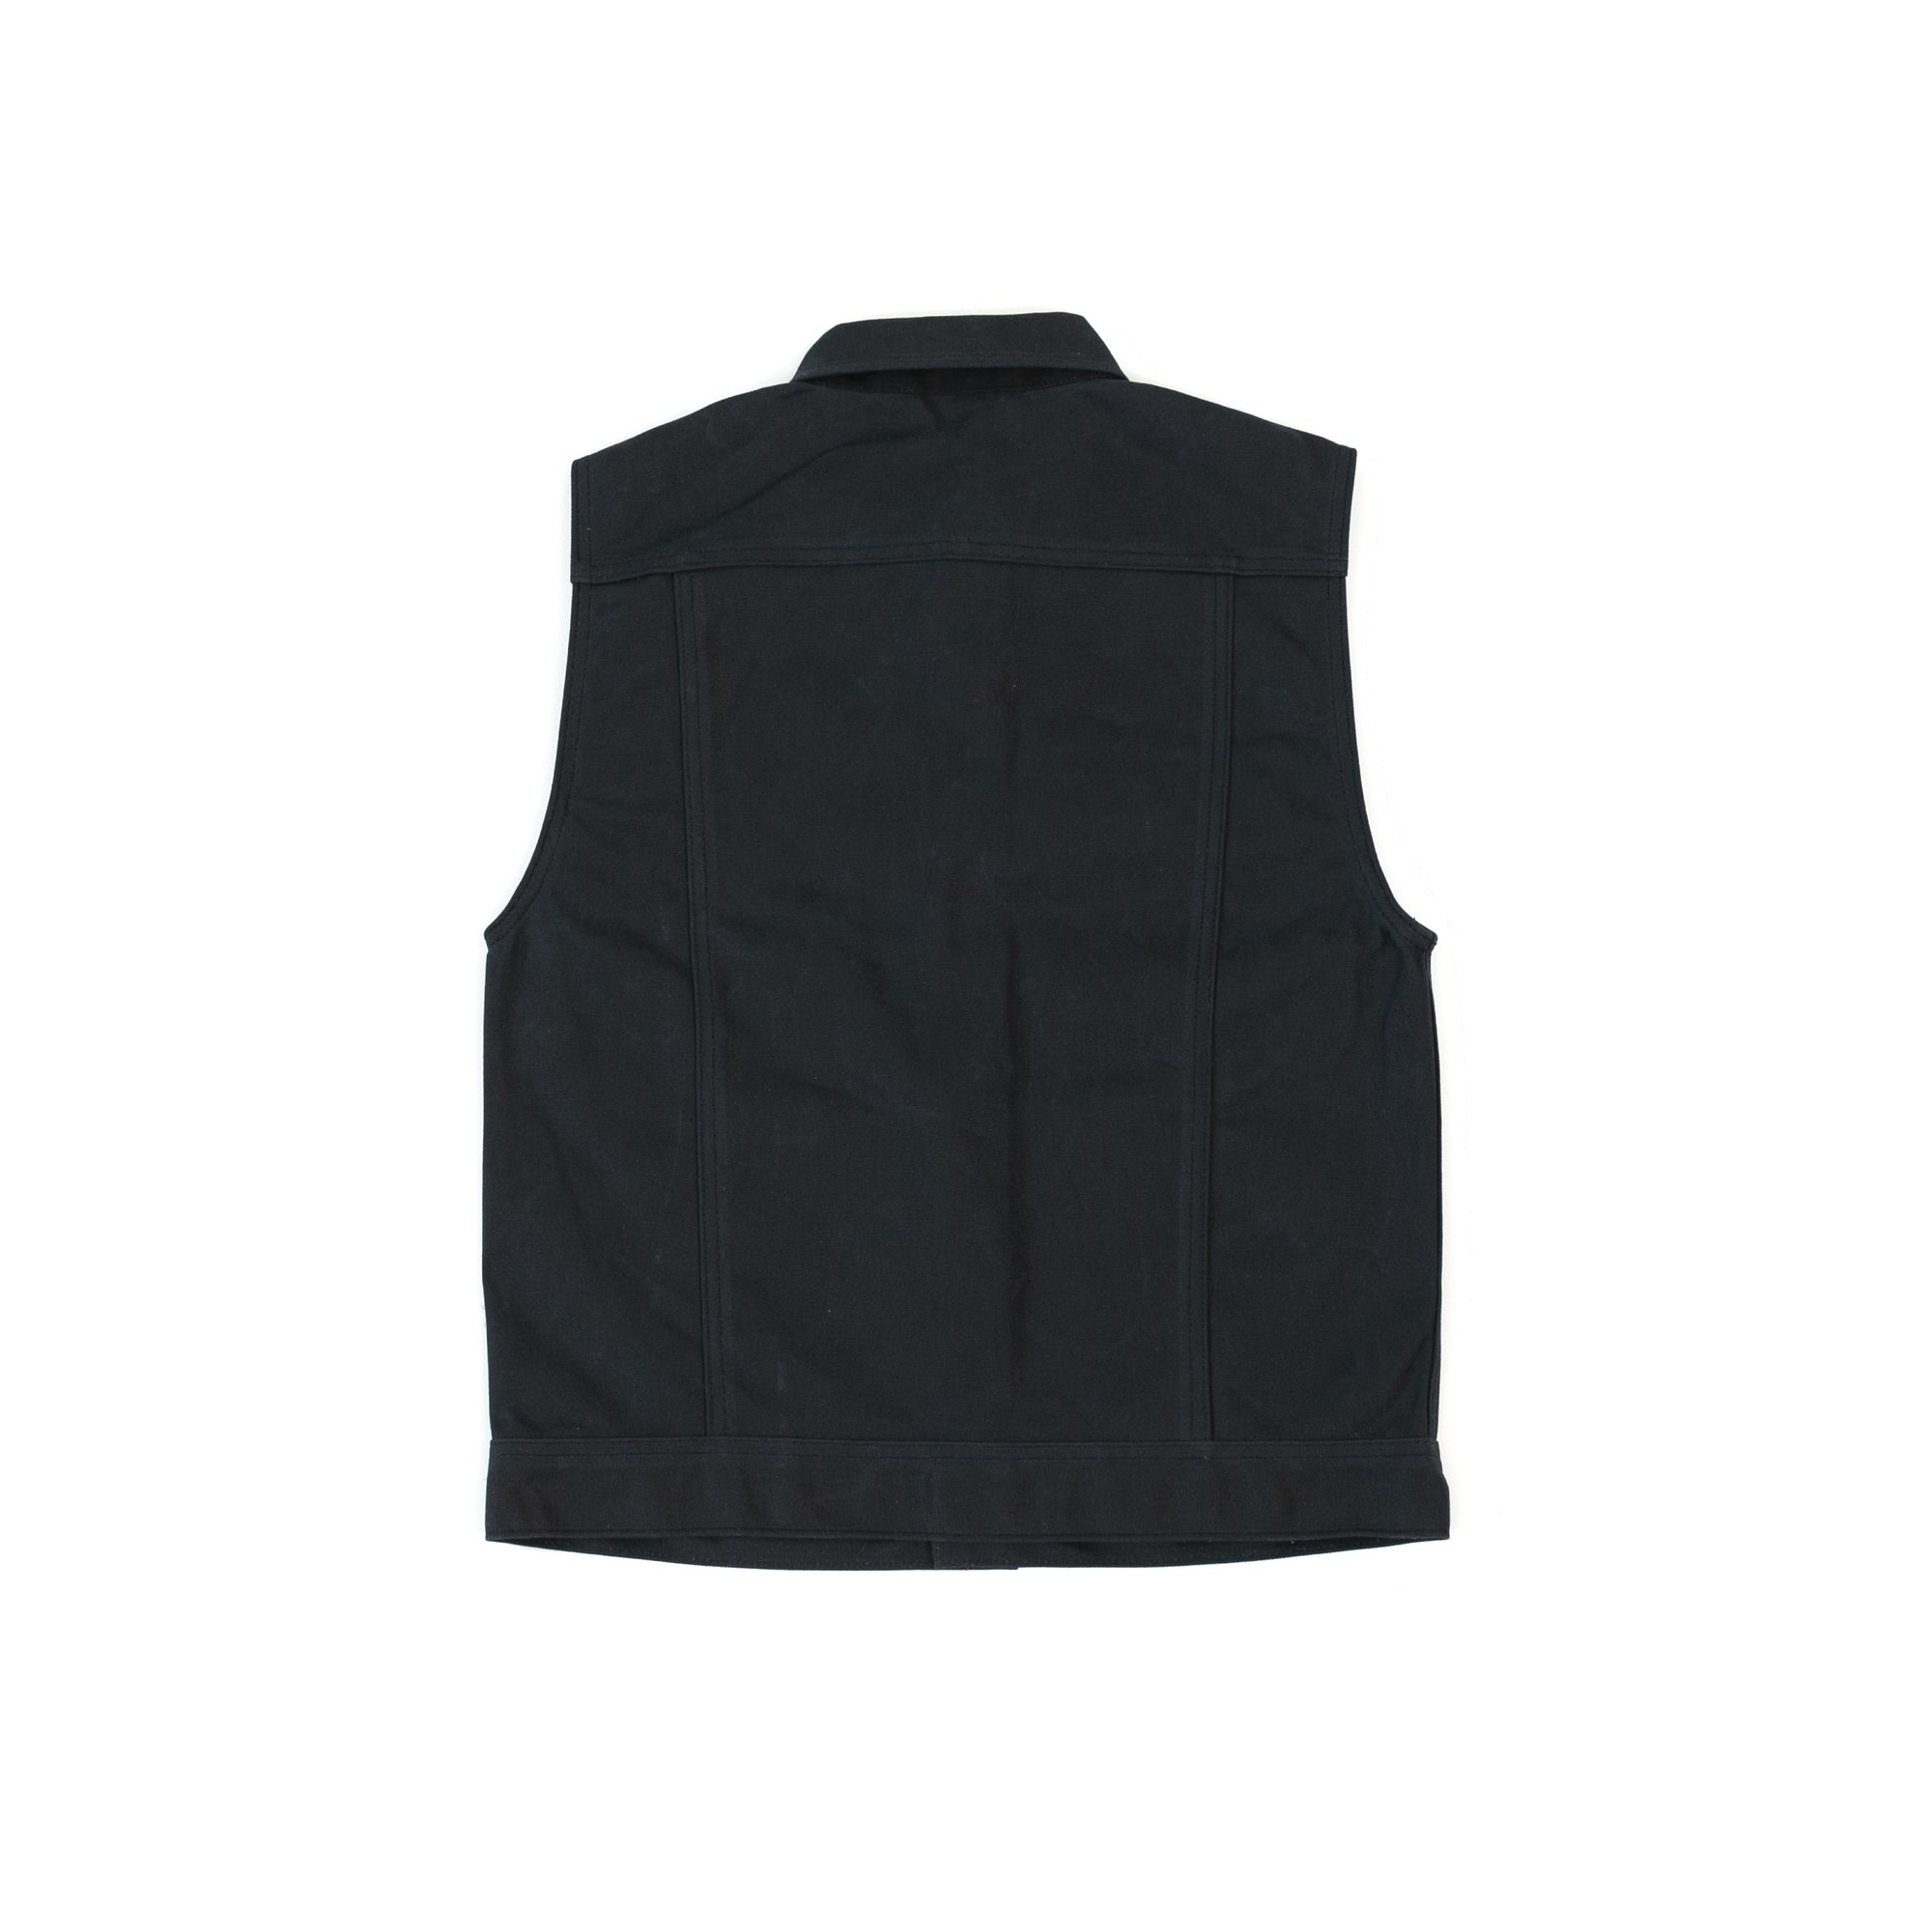 Brown Waxed Canvas Vest - Sidnaw Company